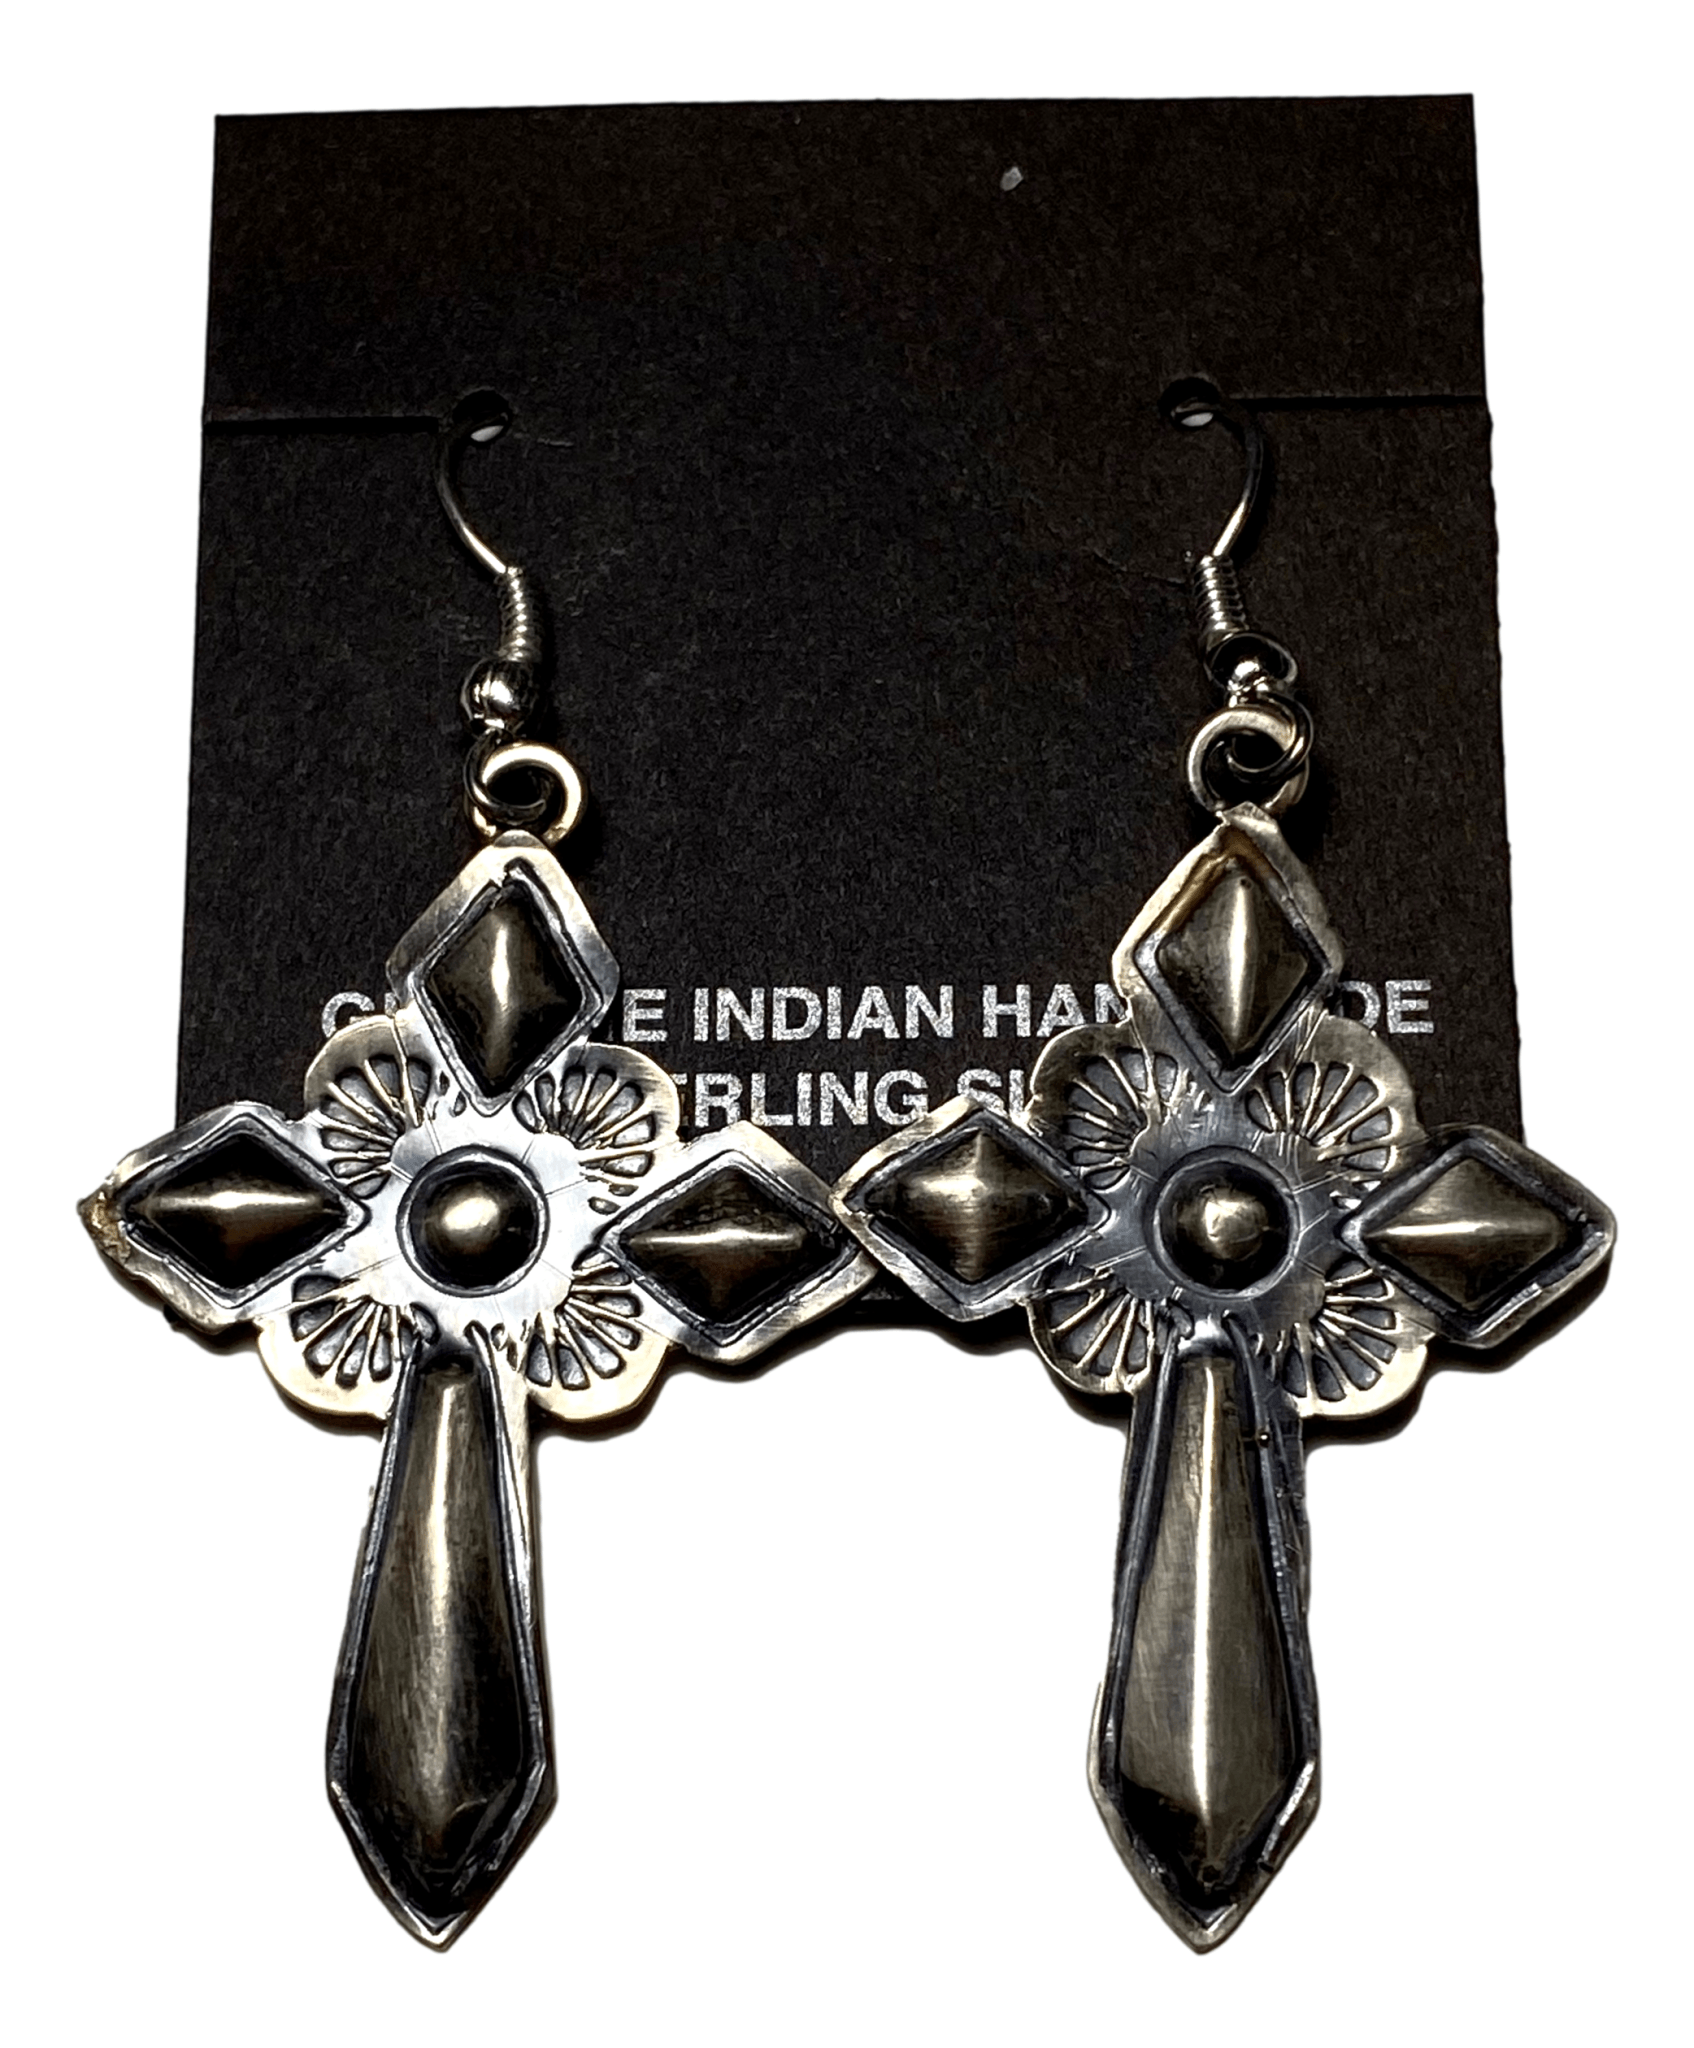 Earrings Dangle Sterling Silver Engraved Cross Diamond Design Handcrafted by Native American Artisan 2 1/4 L x 1 W inches - Ysleta Mission Gift Shop- VOTED El Paso's Best Gift Shop